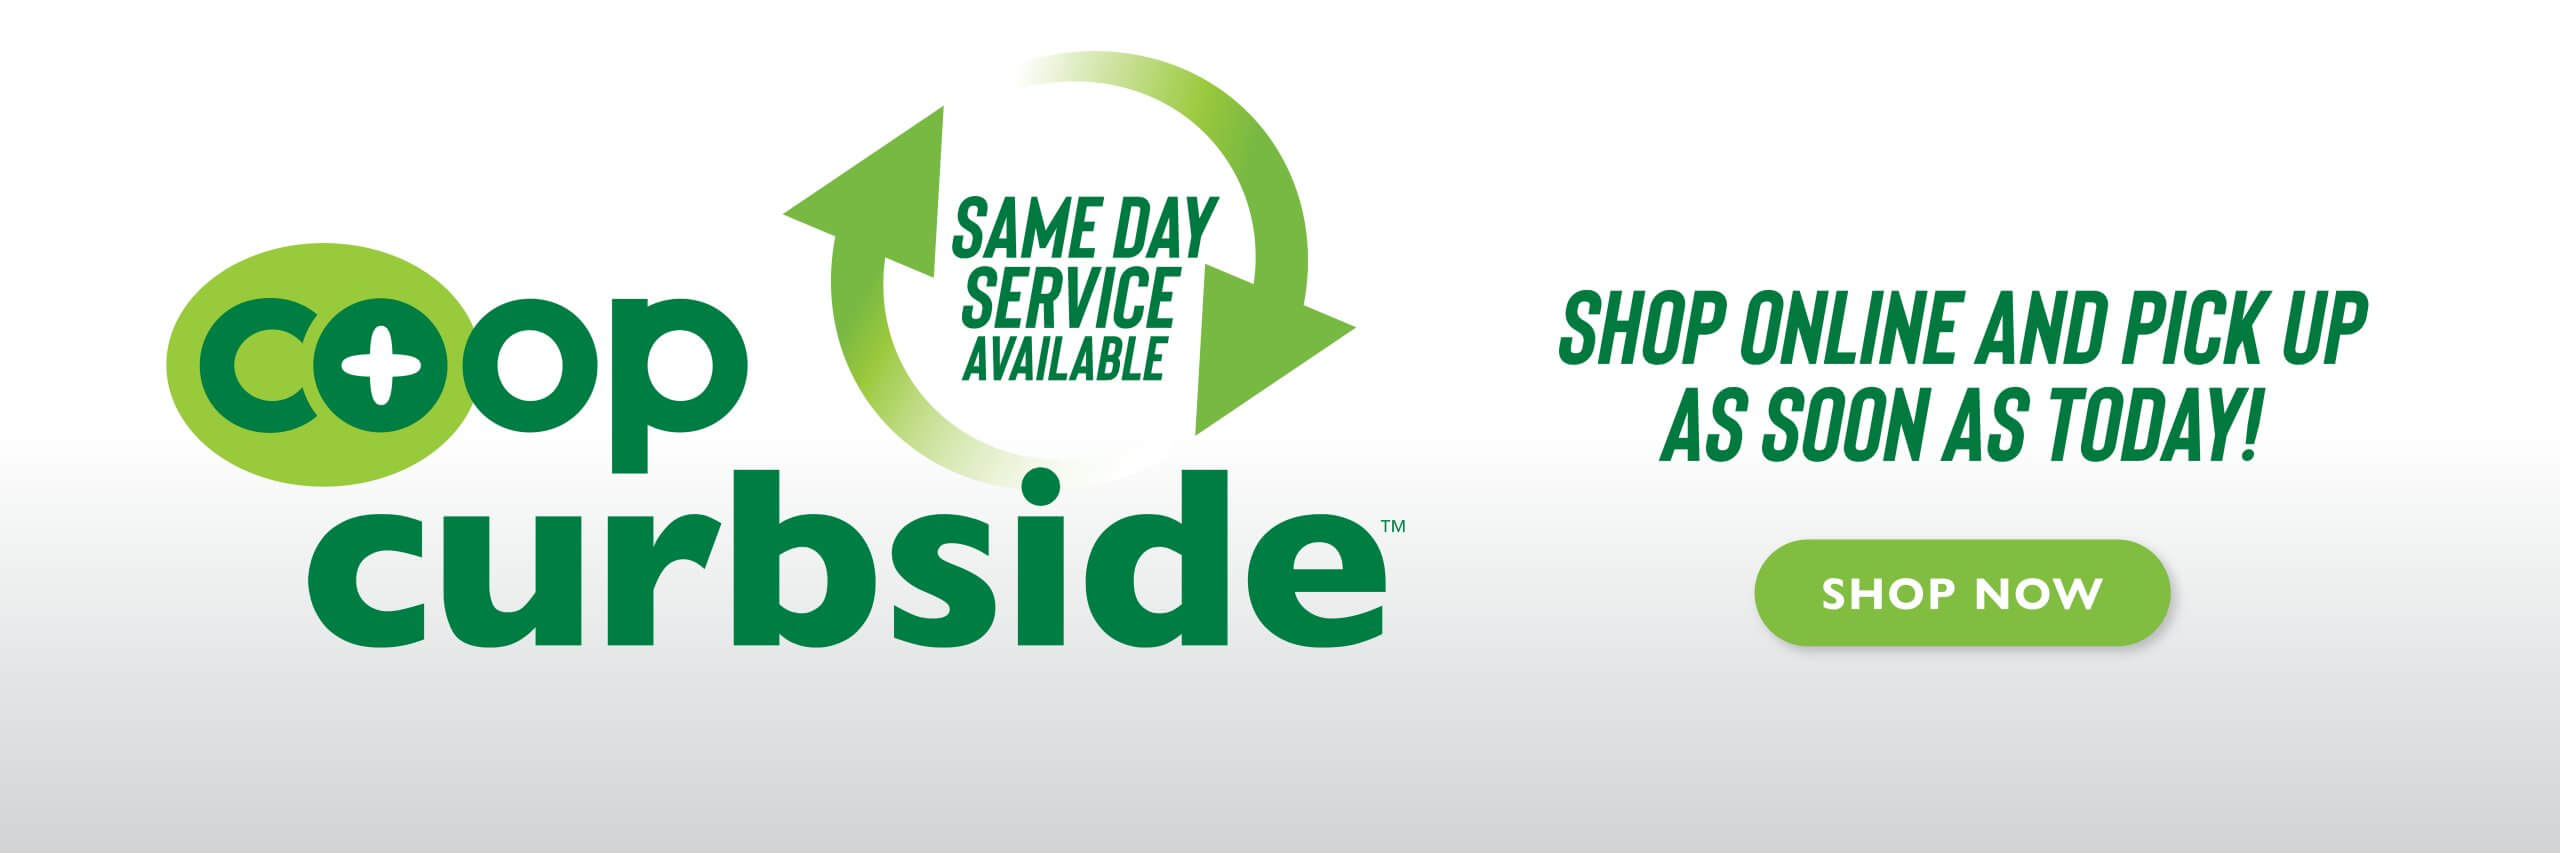 Same Day Service Available Now!